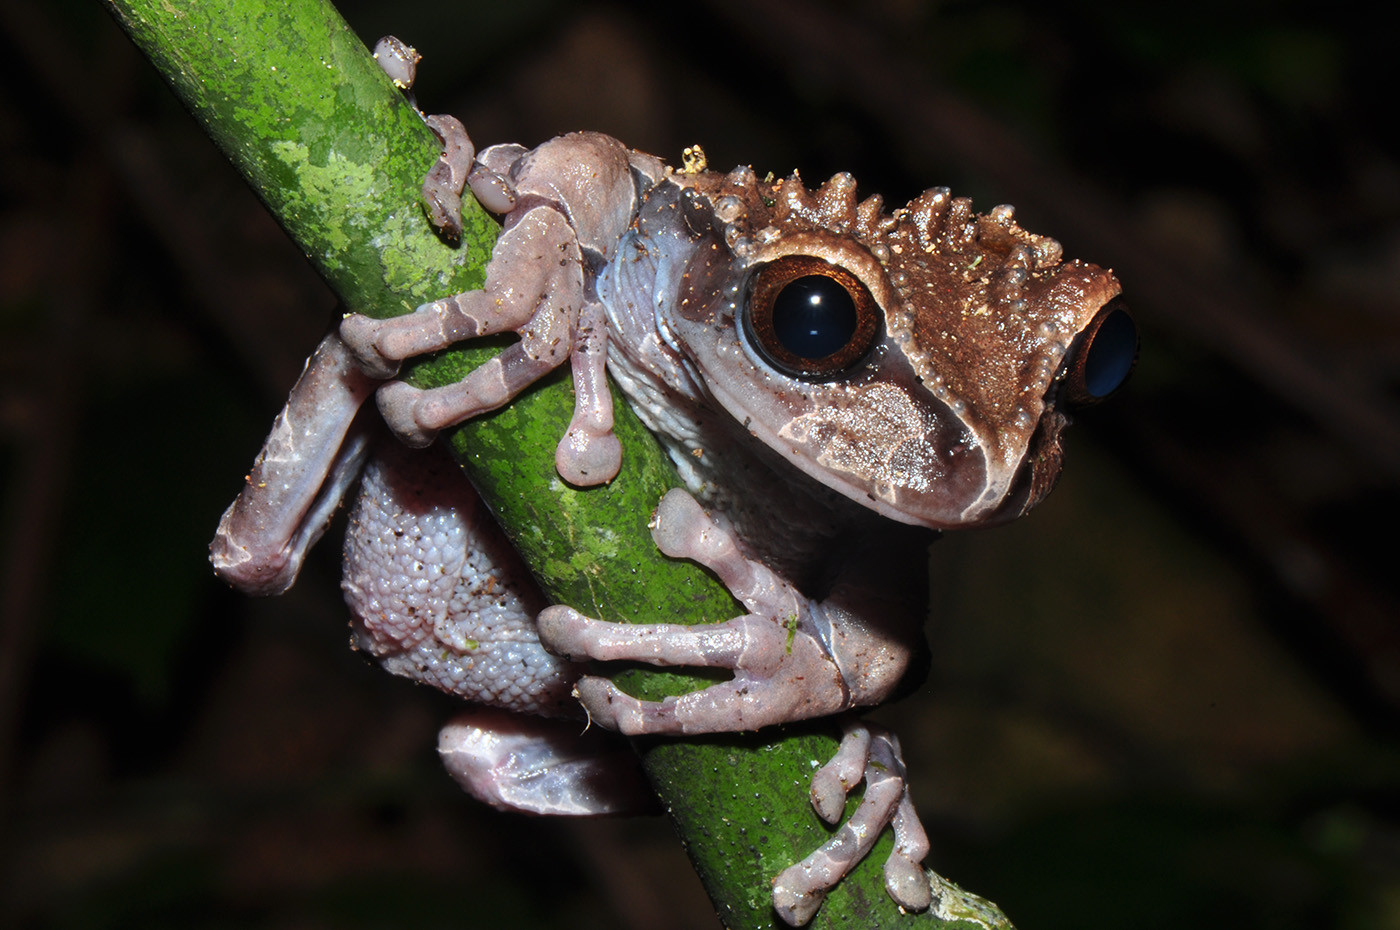 The Spiny-headed tree frog Triprion spinosus has an amazing reproductive strategy that was only became clear through Karl-Heinz’s terrarium observations. When researchers found the first tadpoles…